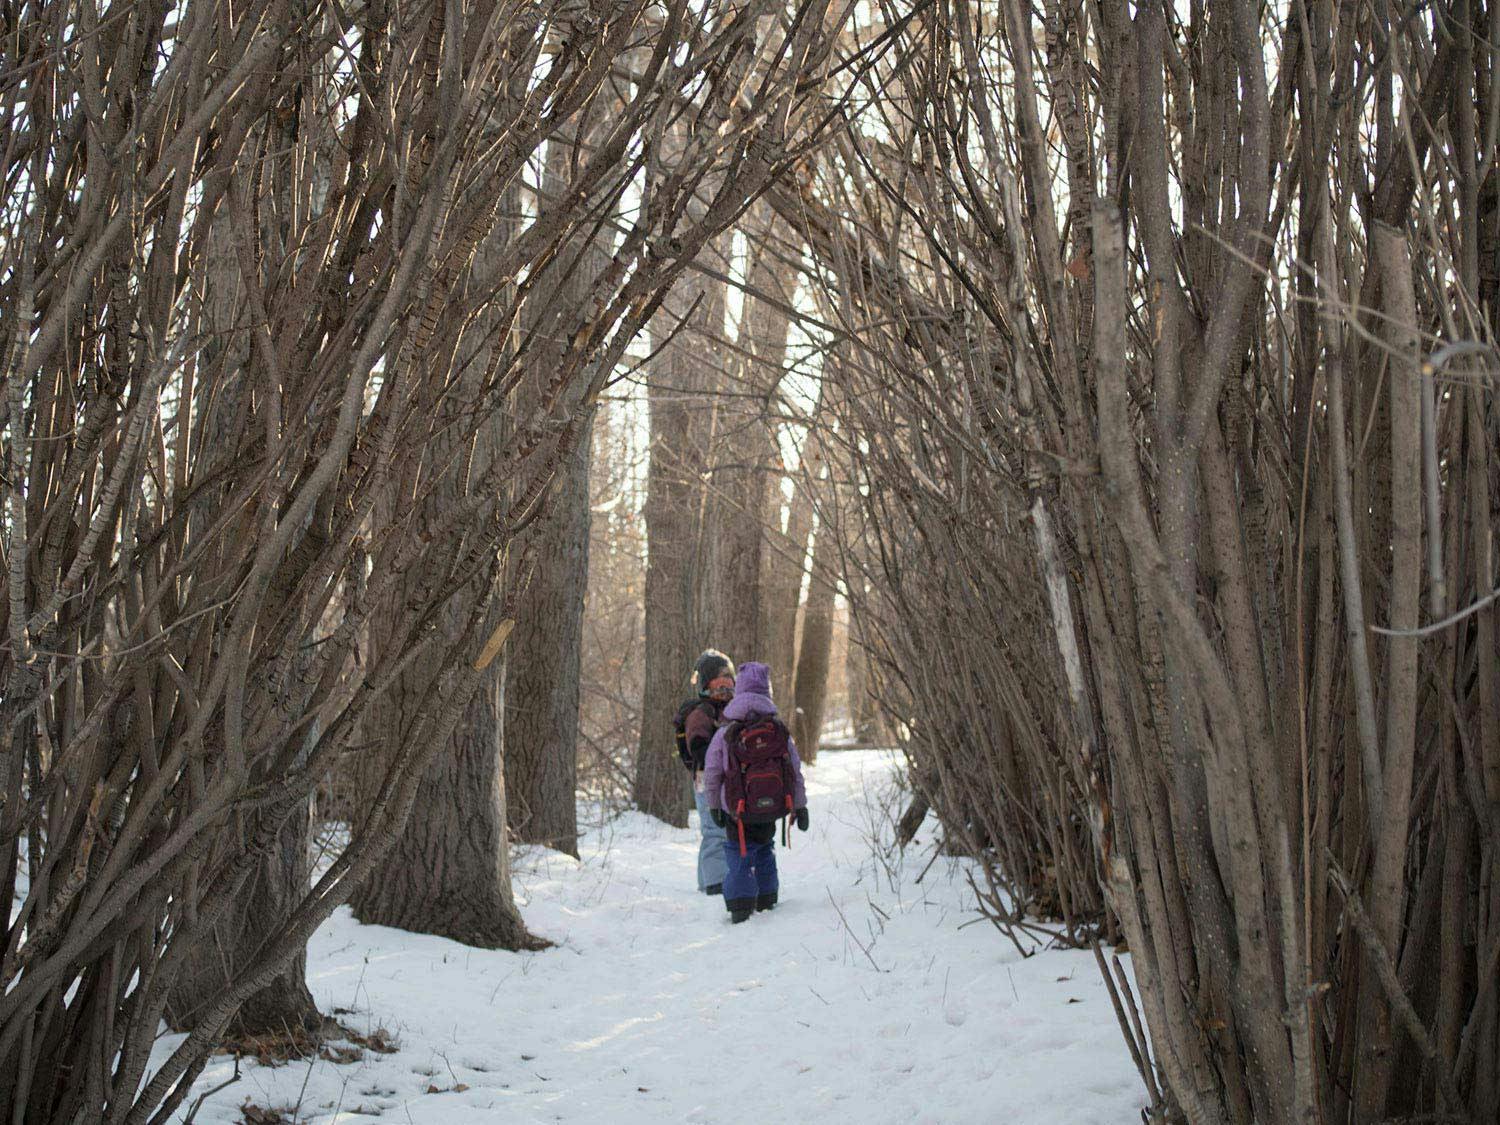 Leafless trees form an arched pathway covering a snowy forest floor. A group of kids walk underneath.